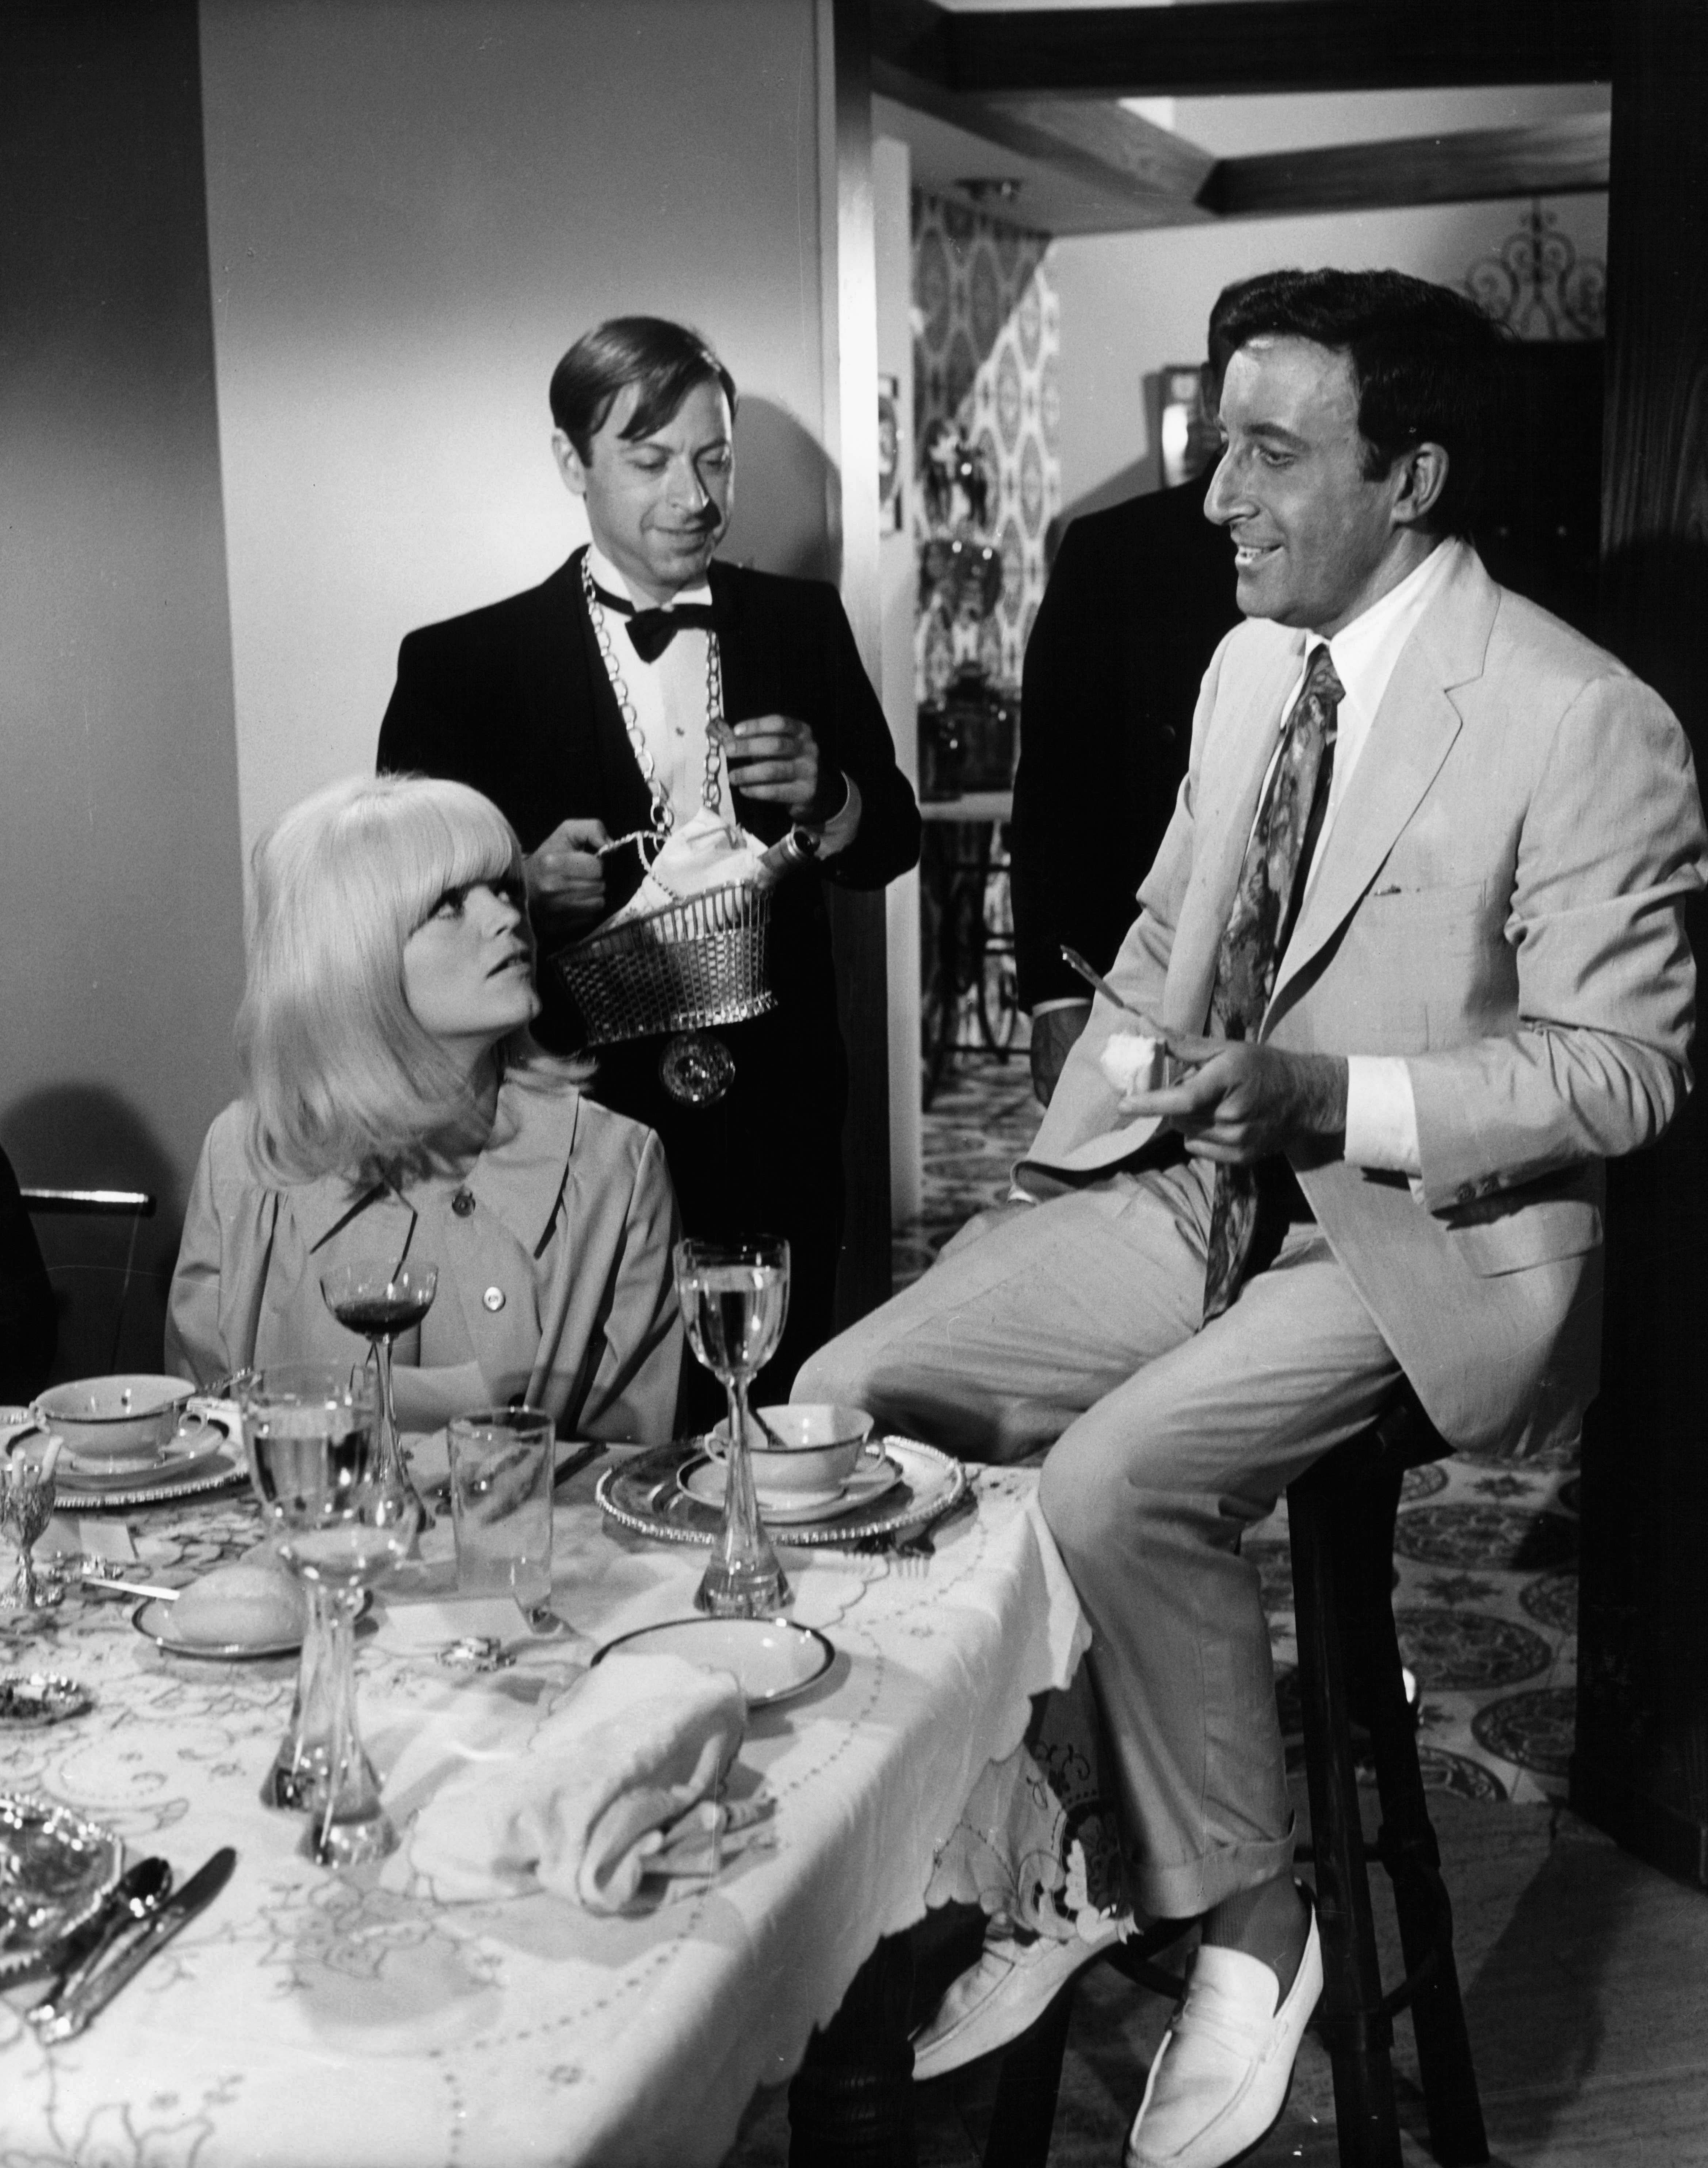 Still of Peter Sellers and Carol Wayne in The Party (1968)